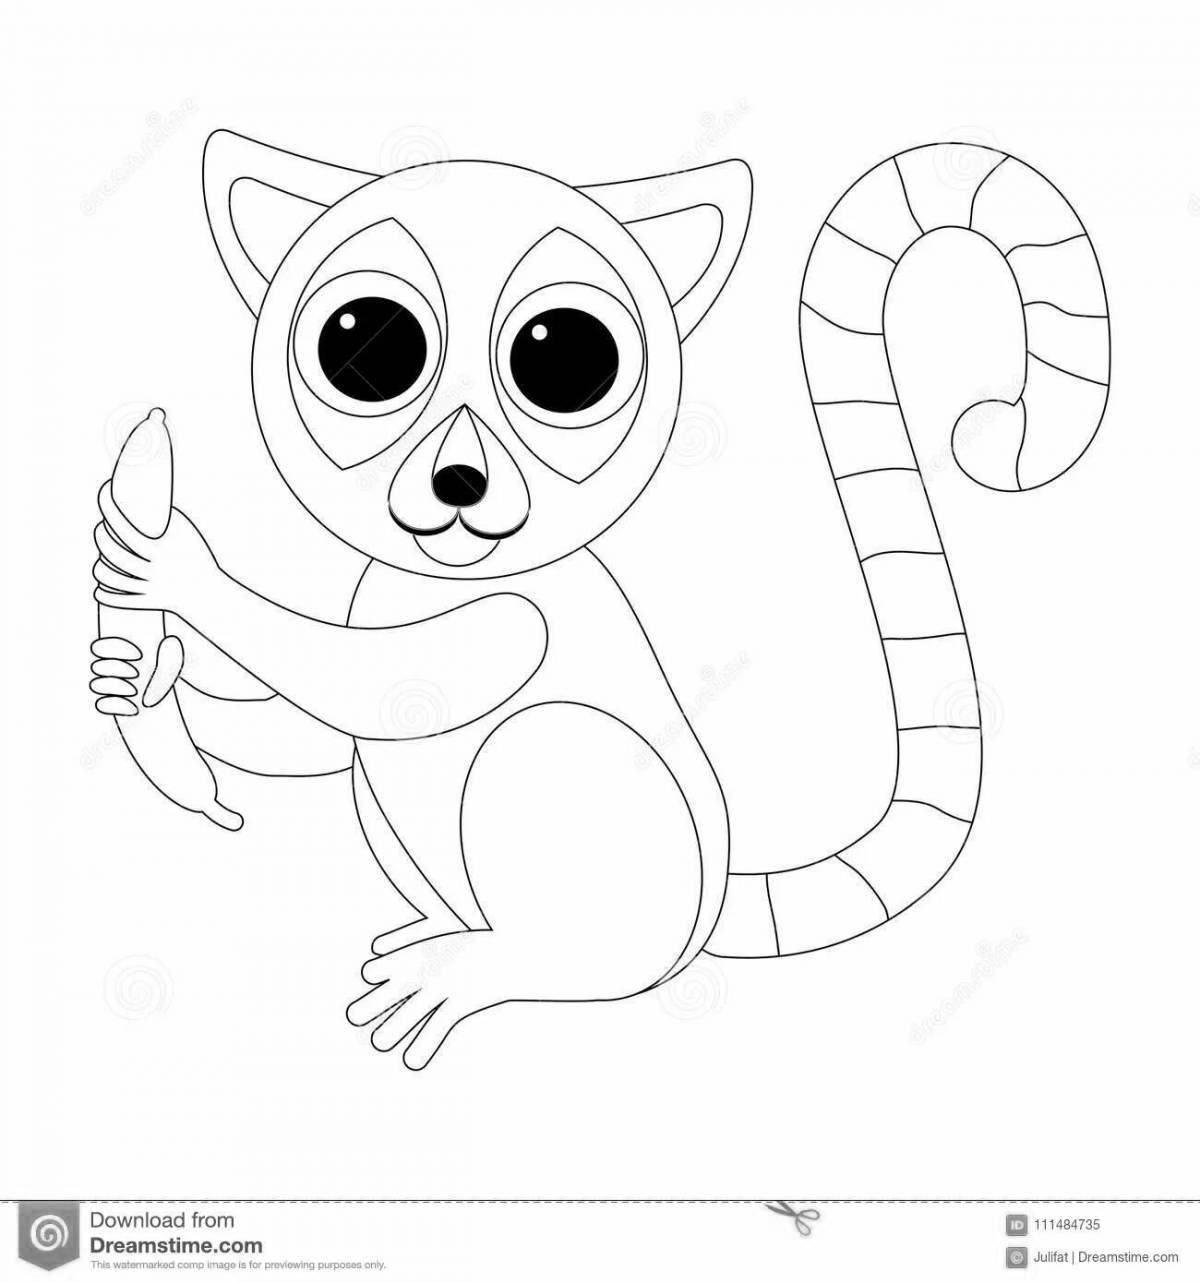 Bright limour coloring page